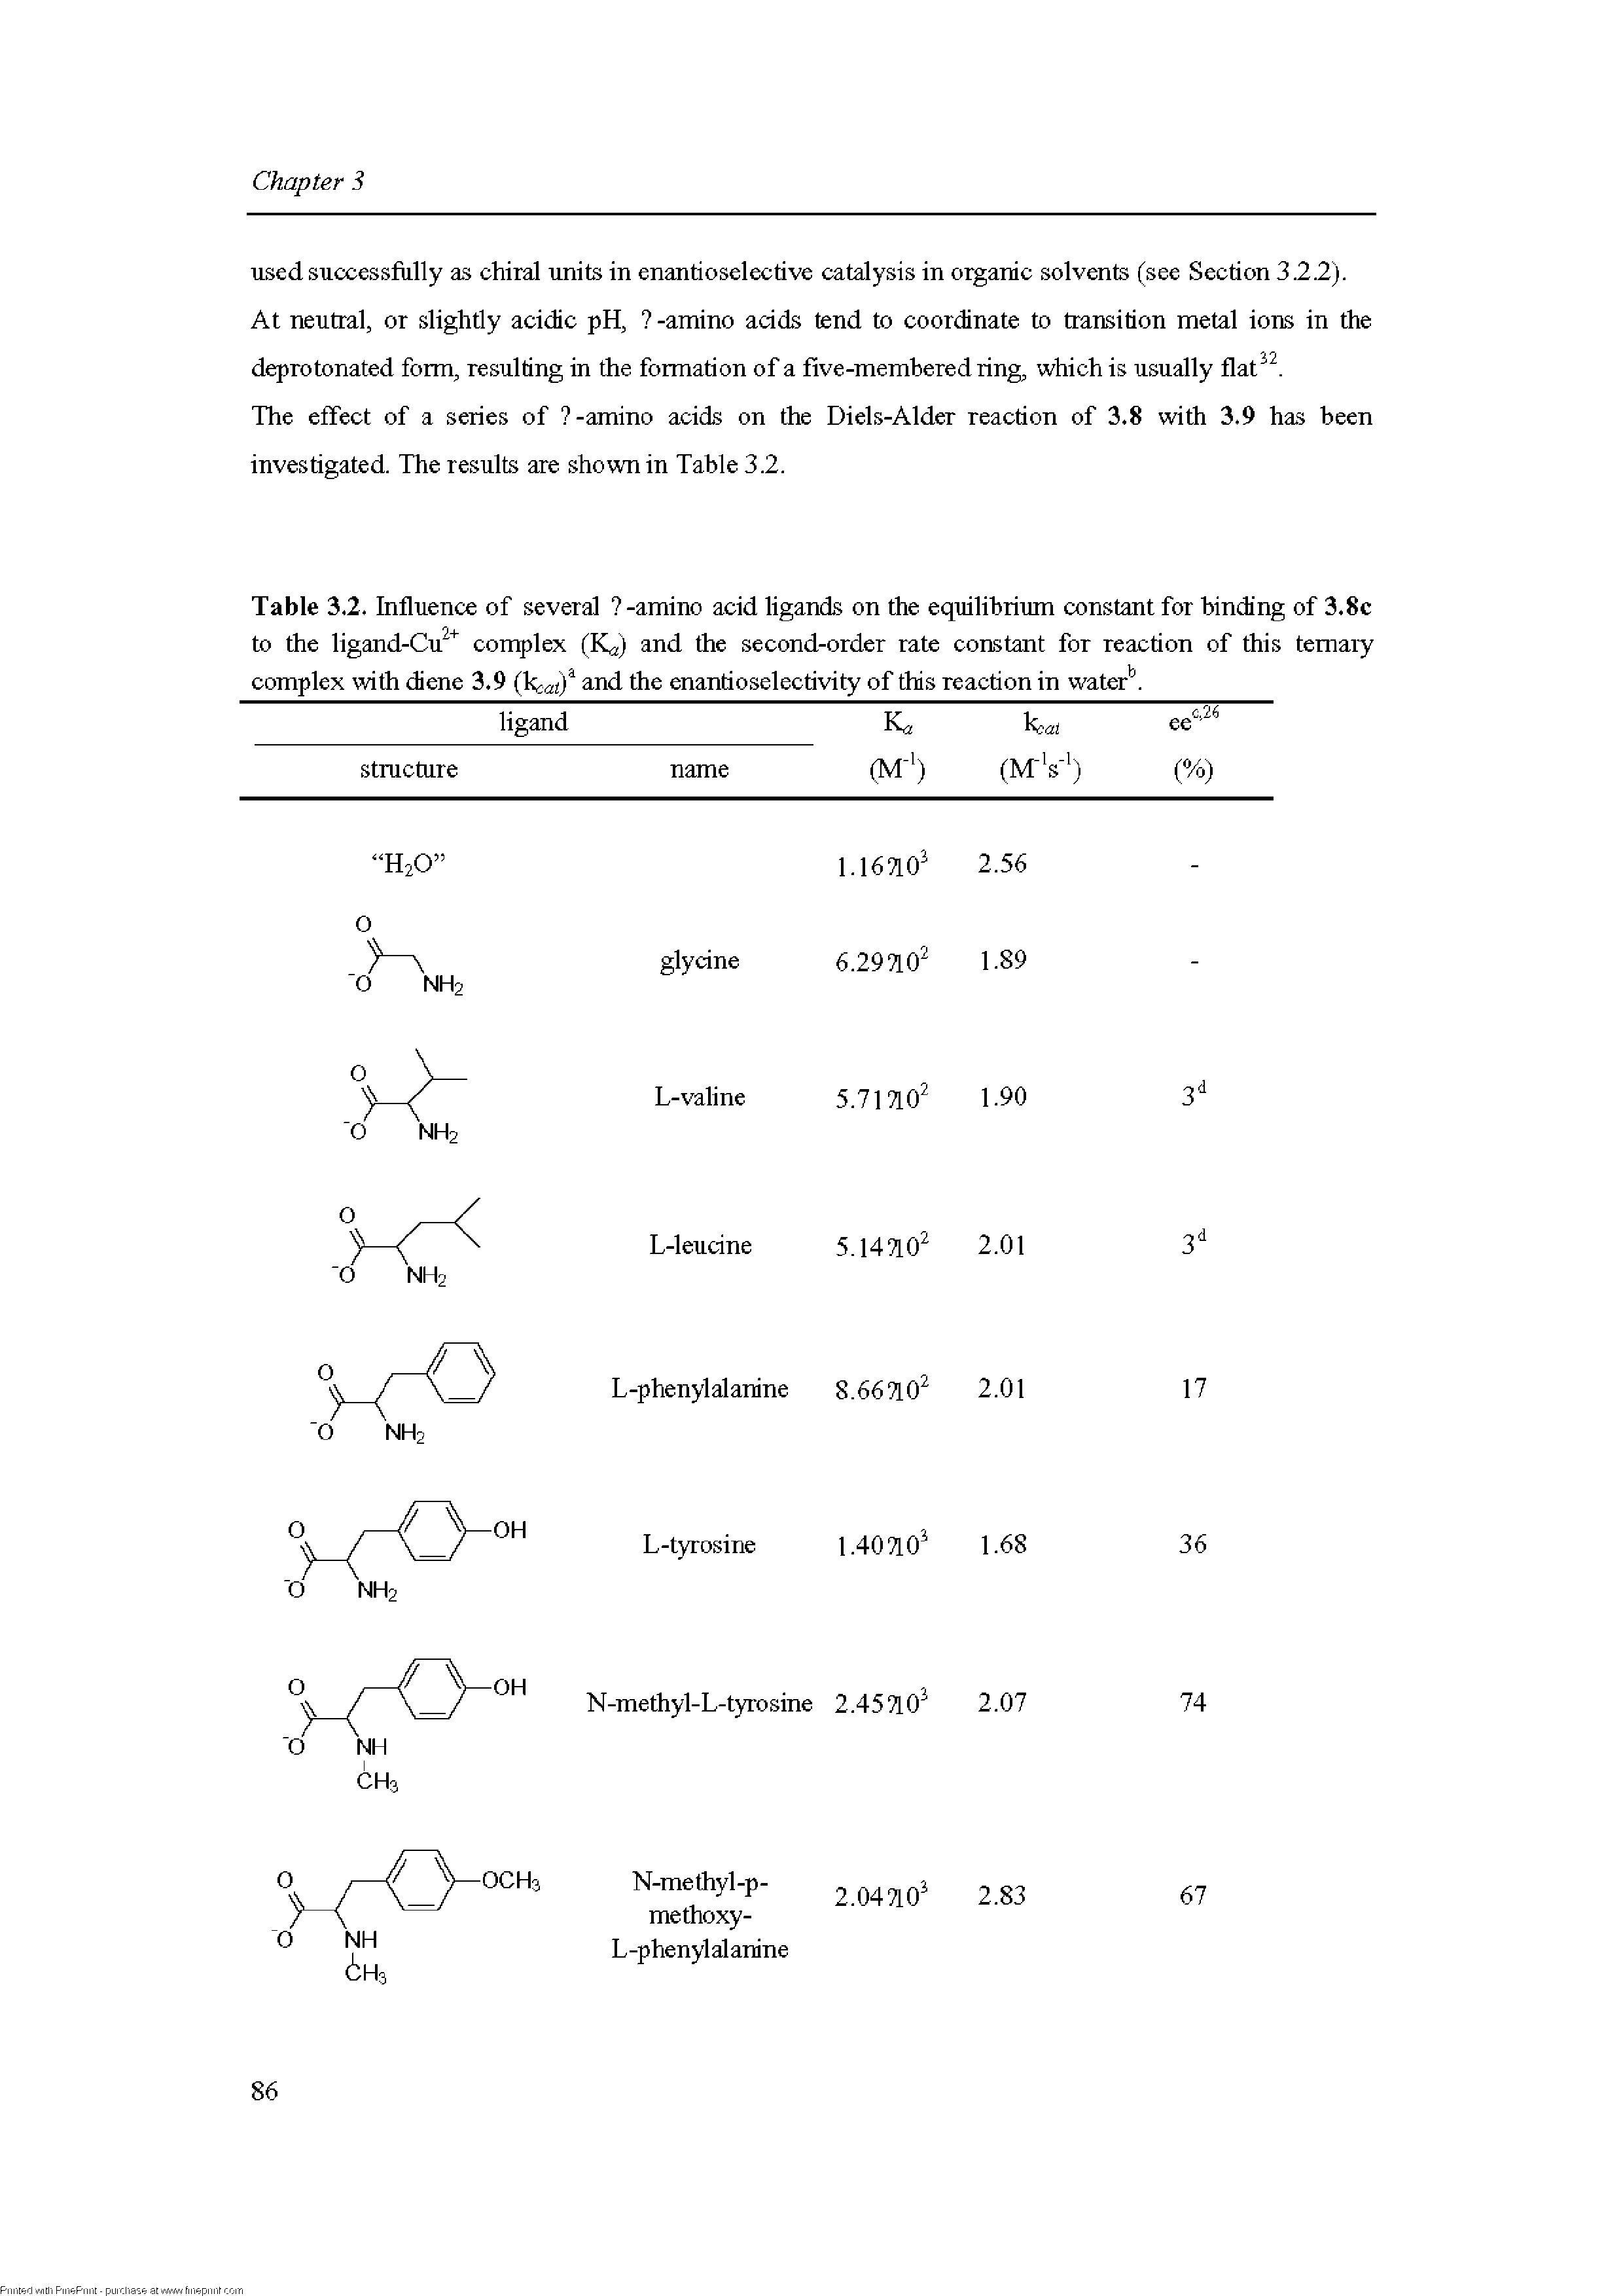 Table 3.2. Influence of several -amino acid ligands on the equilibrium constant for binding of 3.8c...